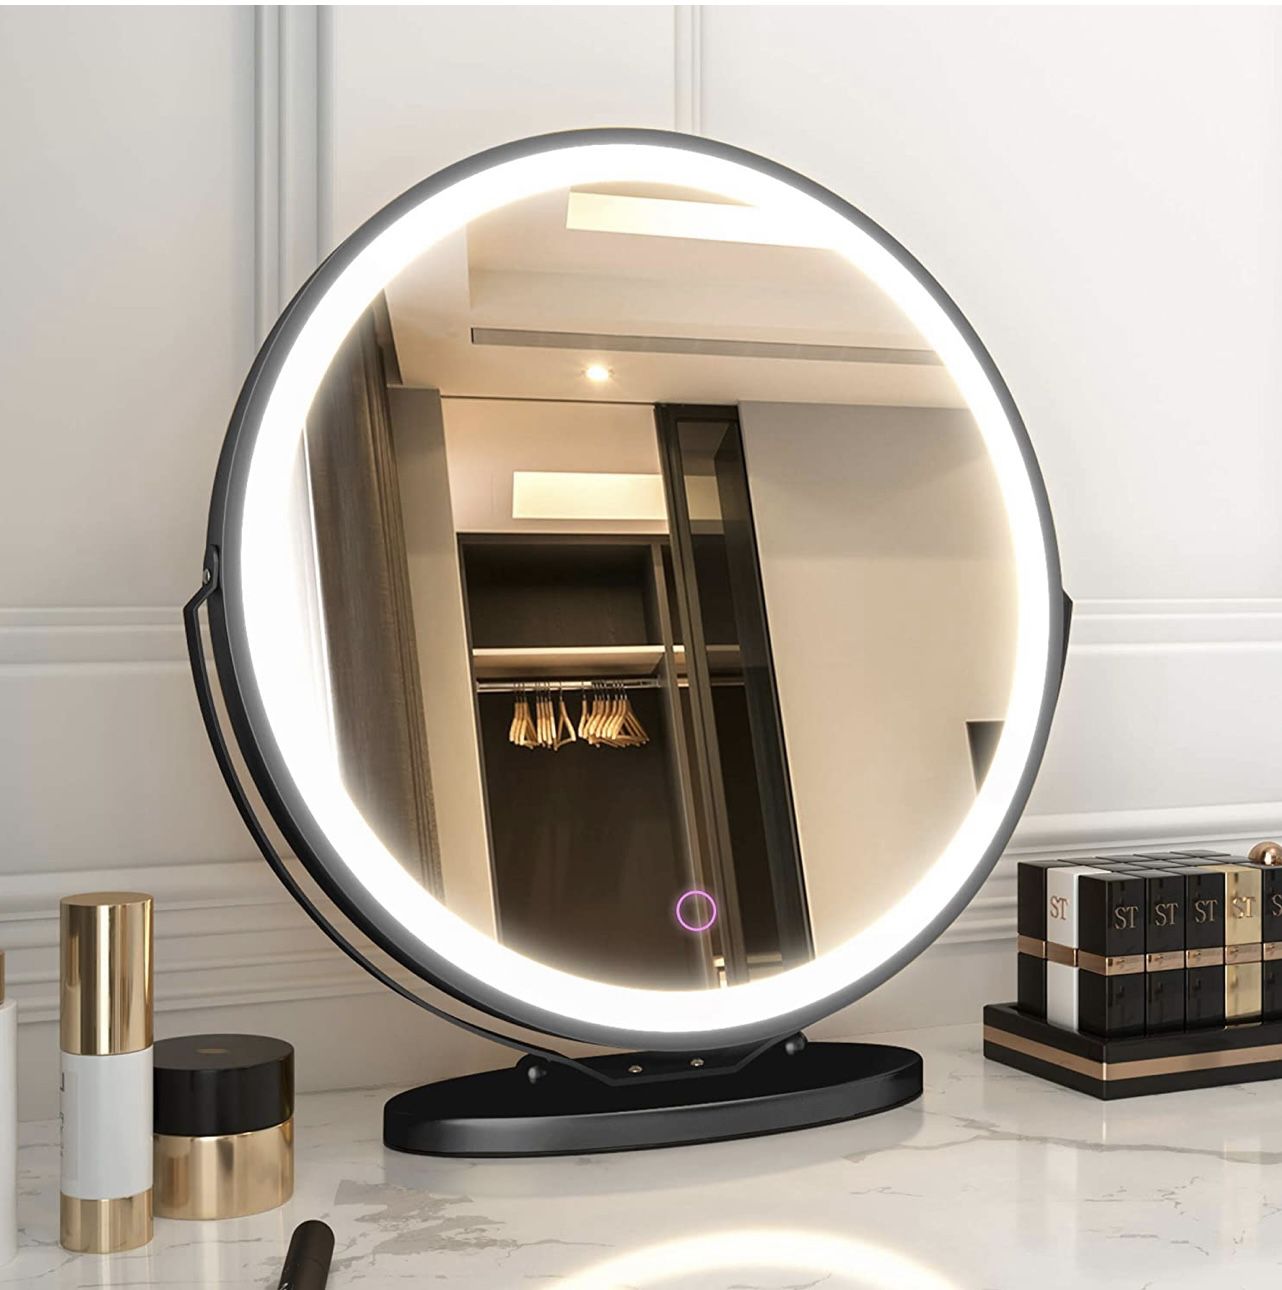 New 20" Vanity Makeup Mirror with Lights, 3 Color Lighting Dimmable LED Mirror